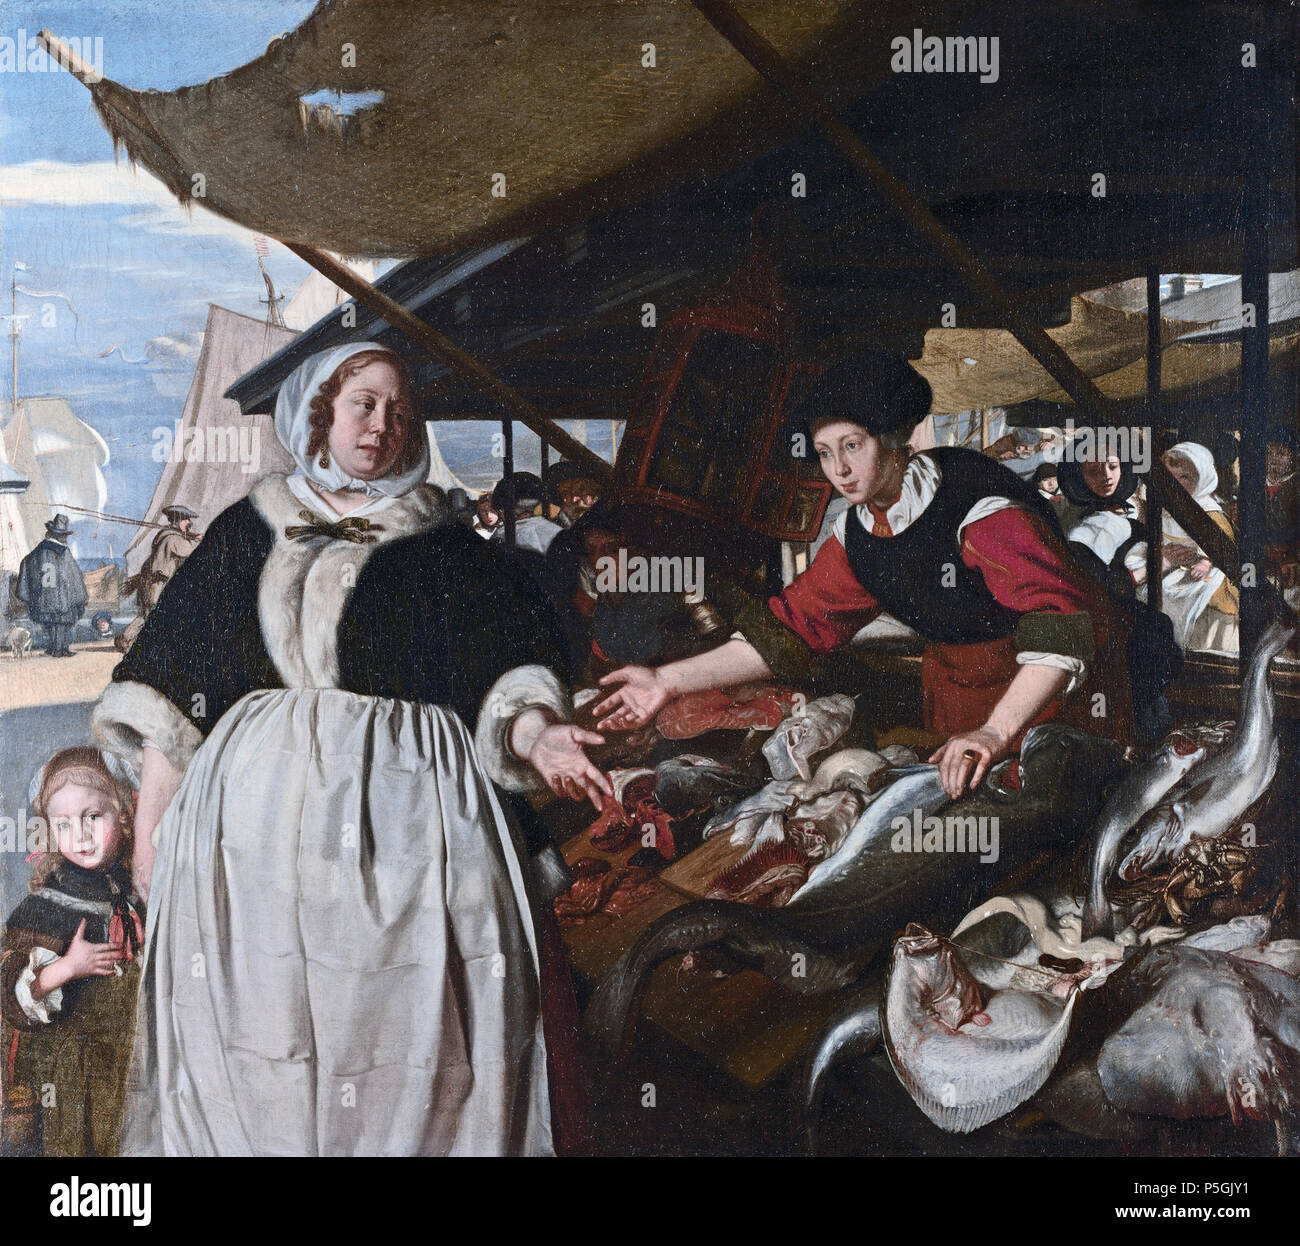 N/A. English: Adriana van Heusden and her daughter at the new fishmarket in Amsterdam oil on canvas 57,10 x 64,10 cm 1632 - 1692  . from 1632 until 1692.   Emanuel de Witte  (1617–1692)     Alternative names Emanuel de Widt; Manuel de Widt; Emanuel de Wit; Manuel de Wit; Emanuel de With; Manuel de With; Emanuel de Witt; Manuel de Witt; Manuel de Witte  Description Dutch painter and draughtsman  Date of birth/death 1617 1692  Location of birth/death Alkmaar Amsterdam  Work location Alkmaar (1636), Delft (1641-1650), Amsterdam (ca. 1652-1692)  Authority control  : Q711203 VIAF:69722781 ISNI:0000 Stock Photo